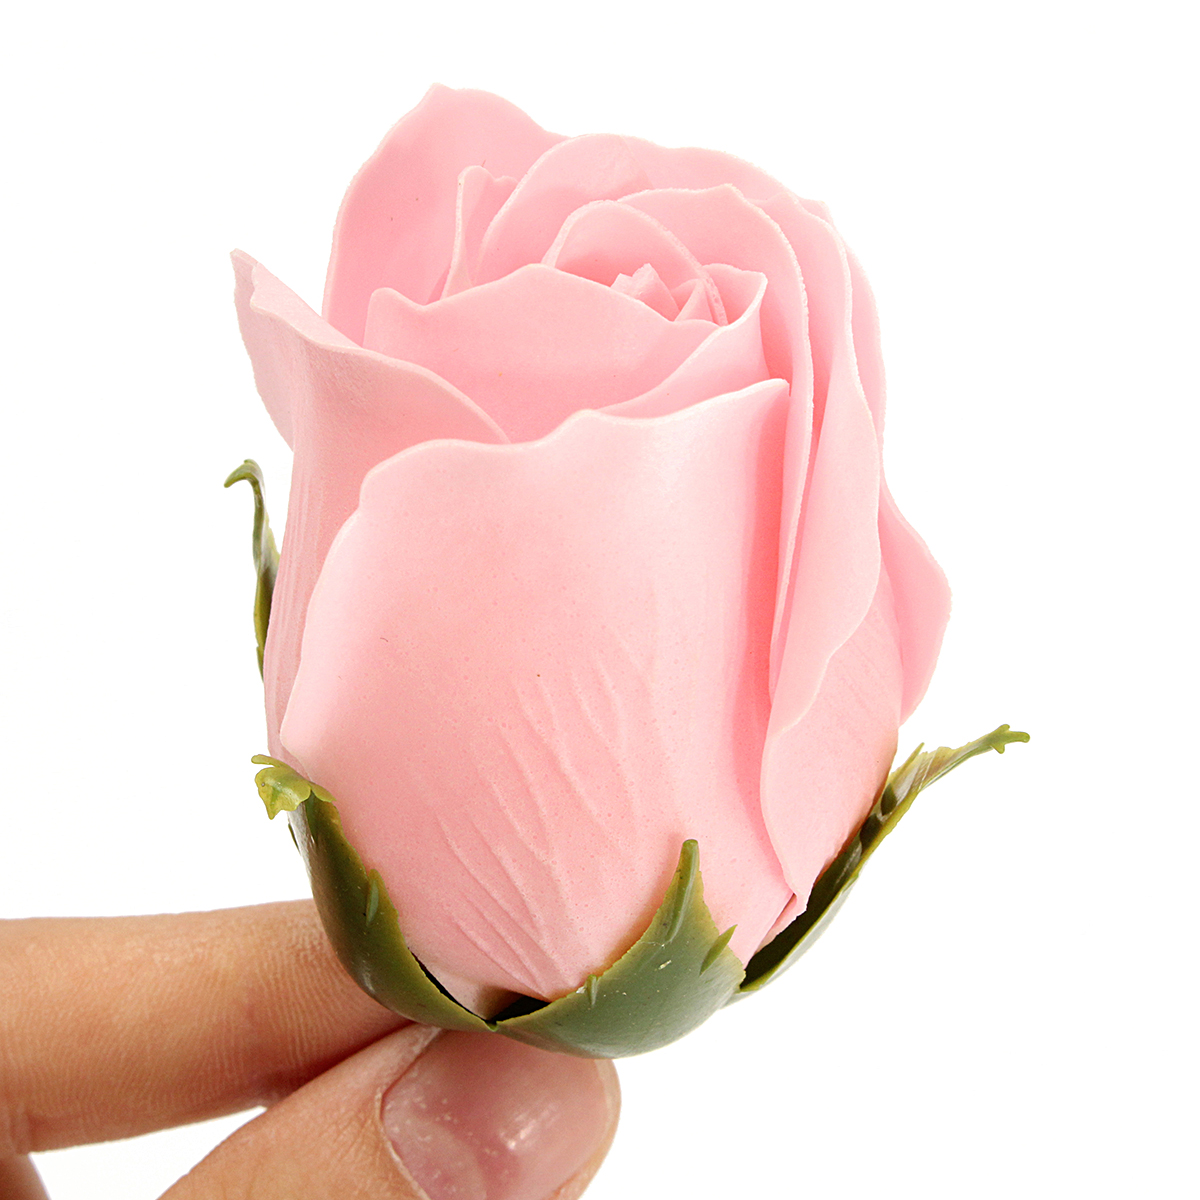 Simulation-Artificial-Rose-Soap-Flower-For-Wedding-Party-Home-Decoration-Valentines-Day-Gift-1069981-12